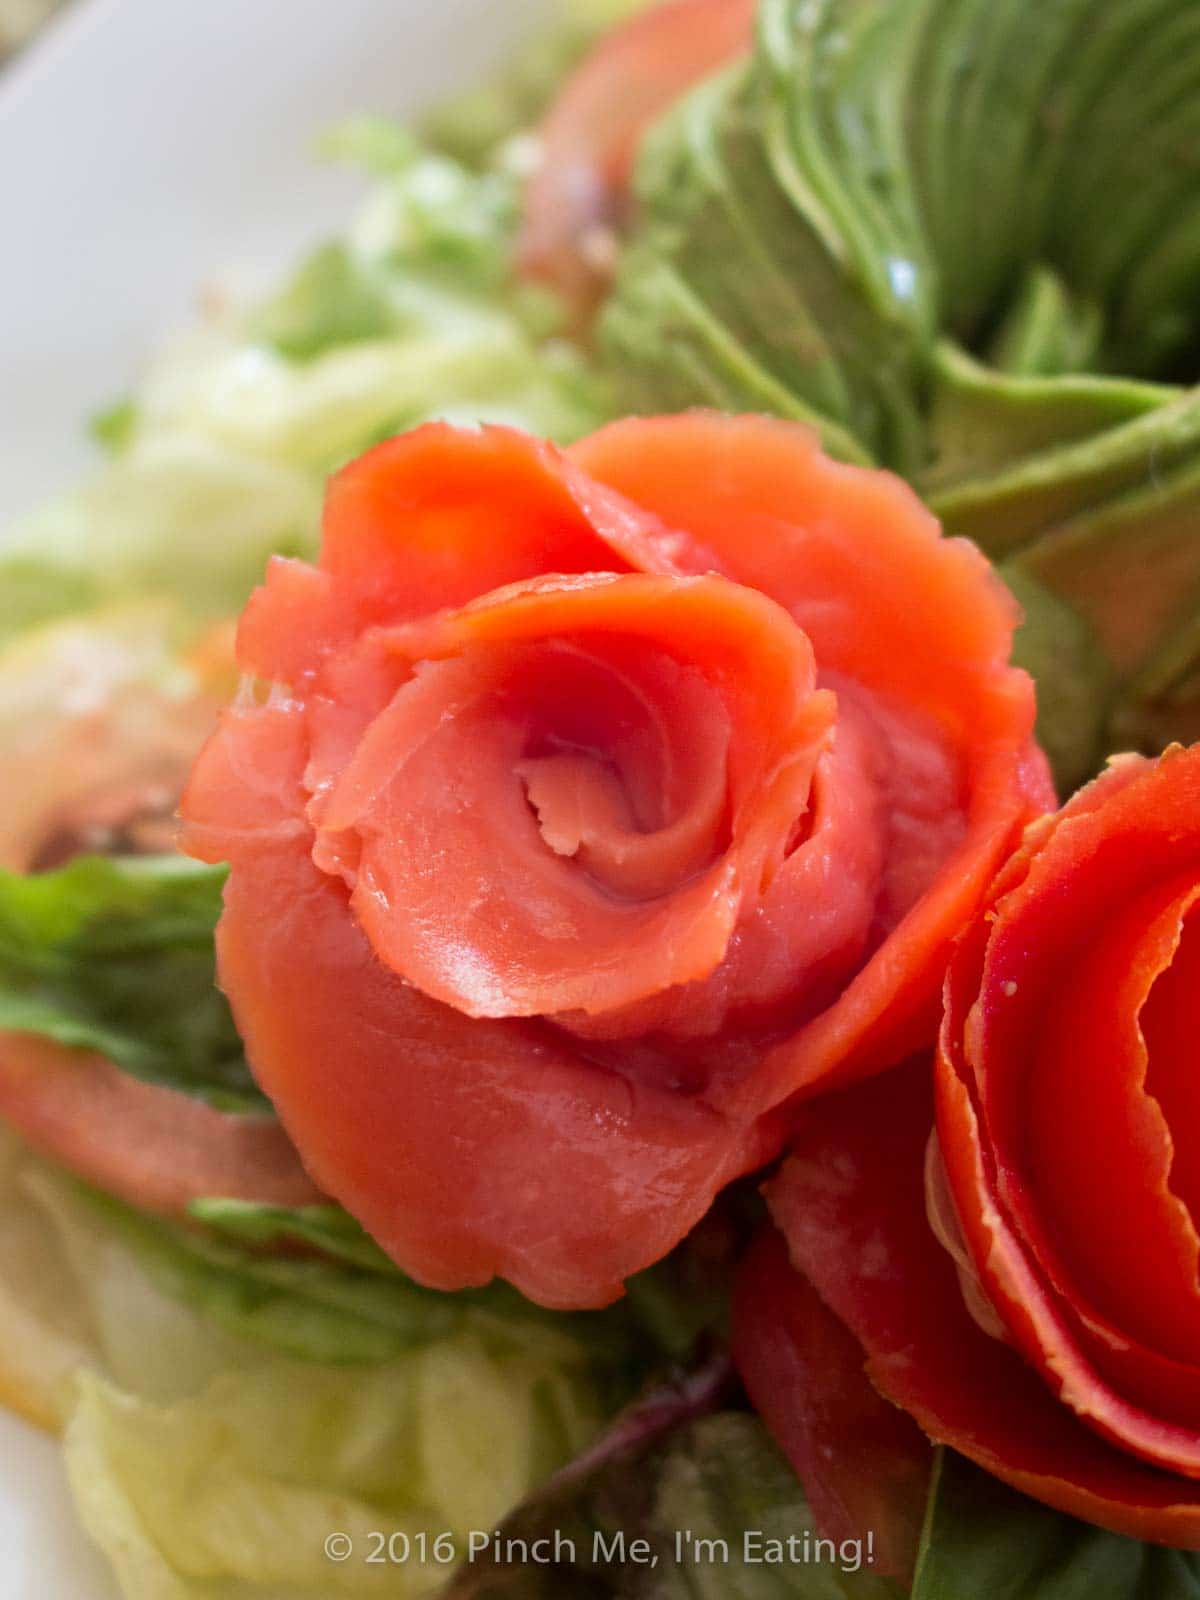 Closeup of an edible rose made from spiraled smoked salmon strips.